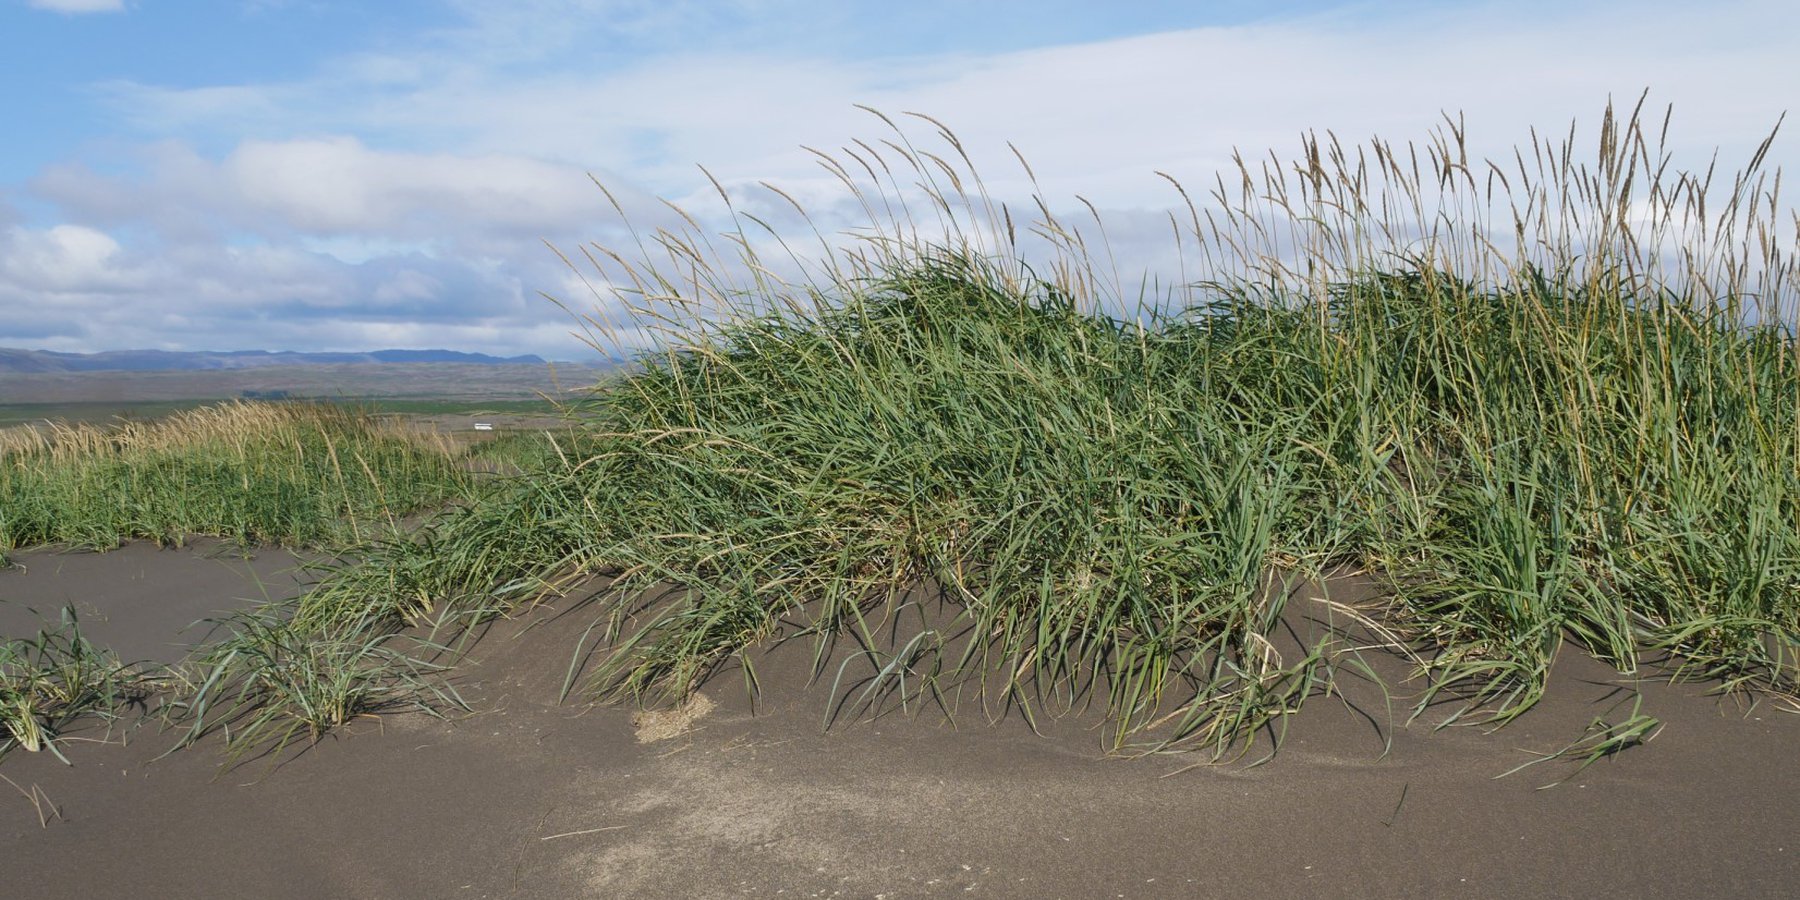 Lime grass grows successfully in sandy underground and thus protects the soil from wind erosion.